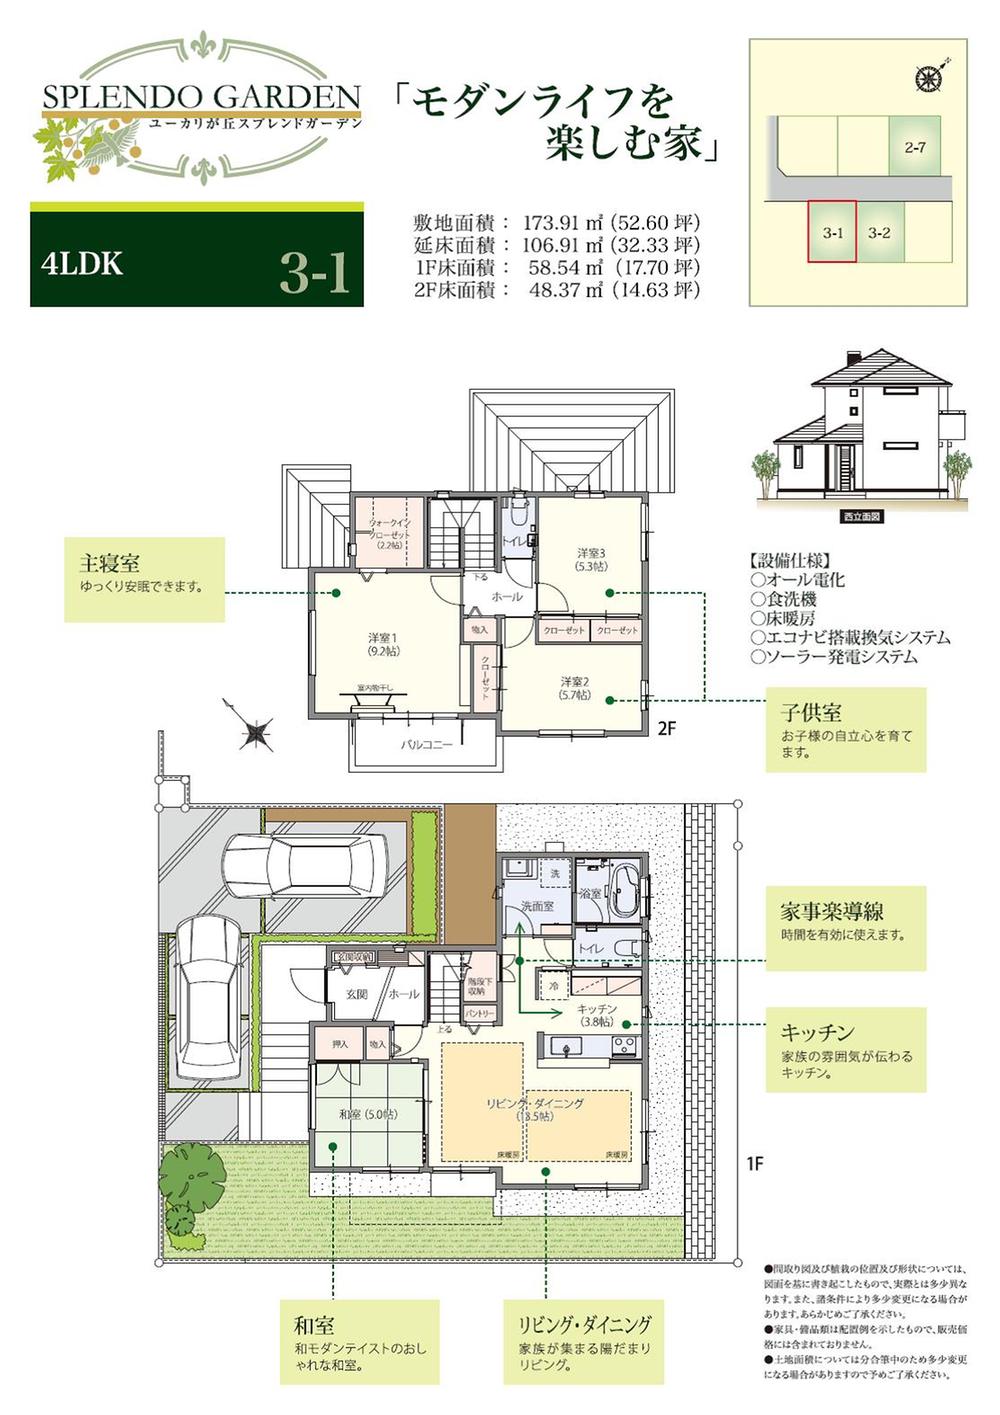 Floor plan. It connects the 260m children and hand until Kotake kindergarten attend is the closeness.